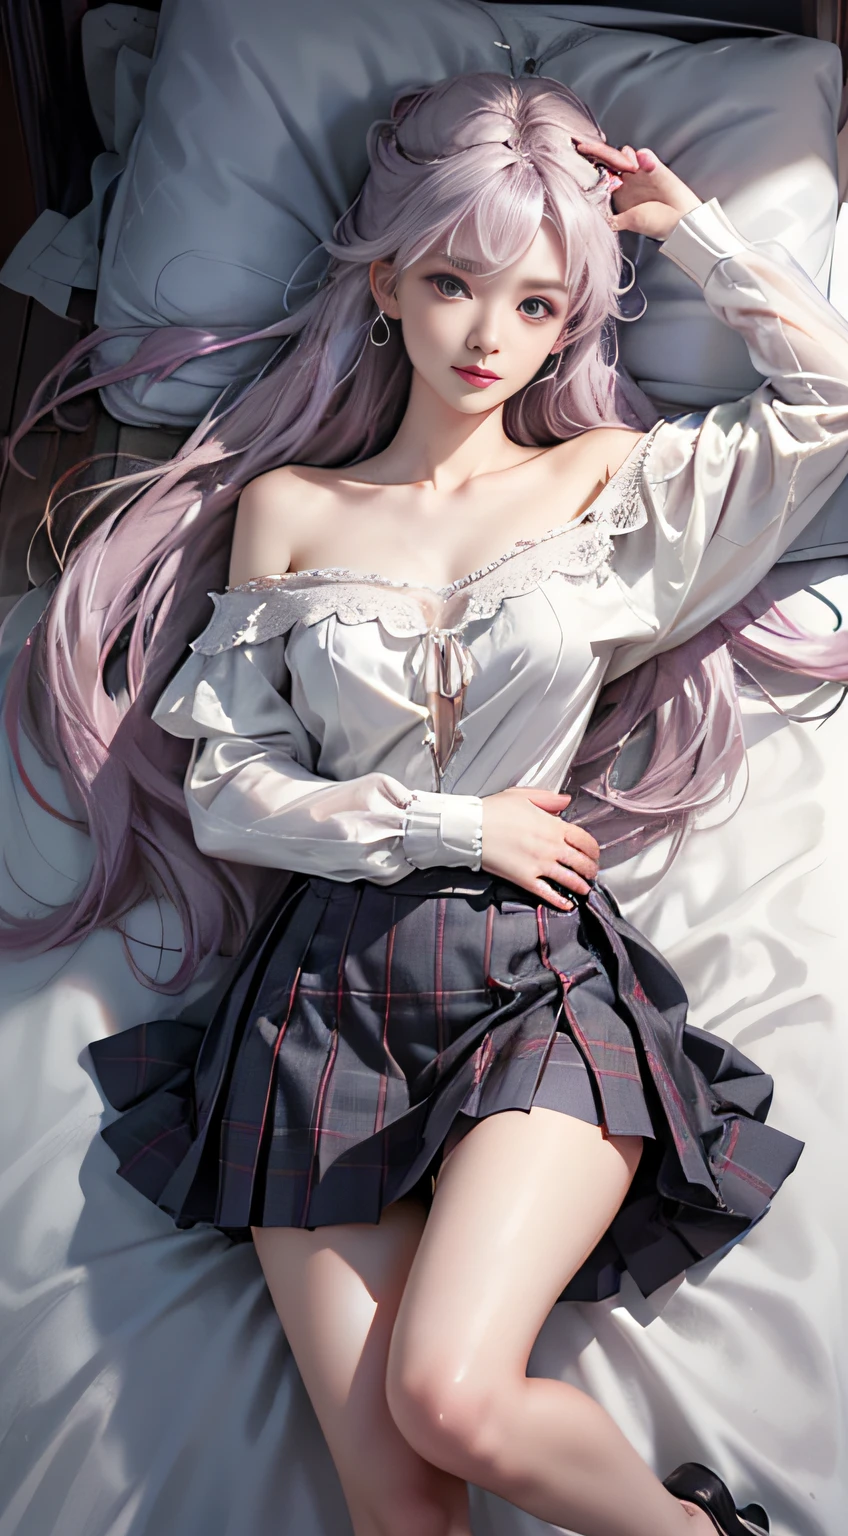 （Woman lying on bed）,1 girl, Silver hair, striated hair, bangs, Blunt bangs, Long hair, Pink hair, aqua eyes, longeyelashes, Purple eyes, makeup, Smile, Parted lips, Realism, Verism, Surrealism, depth of fields, One-person viewpoint, F/1.8, 135 mm, canon, nffsw, retinas, masutepiece, ccurate, Anatomically correct, Textured skin, Super Detail, high details, High quality, Best Quality, hight resolution, 1080P, hard disk, 4K, 8k、（Full Body Angle）、(o Off-the-shoulder translucent white blouse), (Loose red tie)、(Dark blue checked miniskirt),((Lift the hem of the skirt)),((lift up skirt))((Lace white panties are visible))（shapely breasts,)、((sexypose))、(camel's toe)、shinny skin。realisitic、Photorealsitic:1.37)、(solo)、dynamicposes